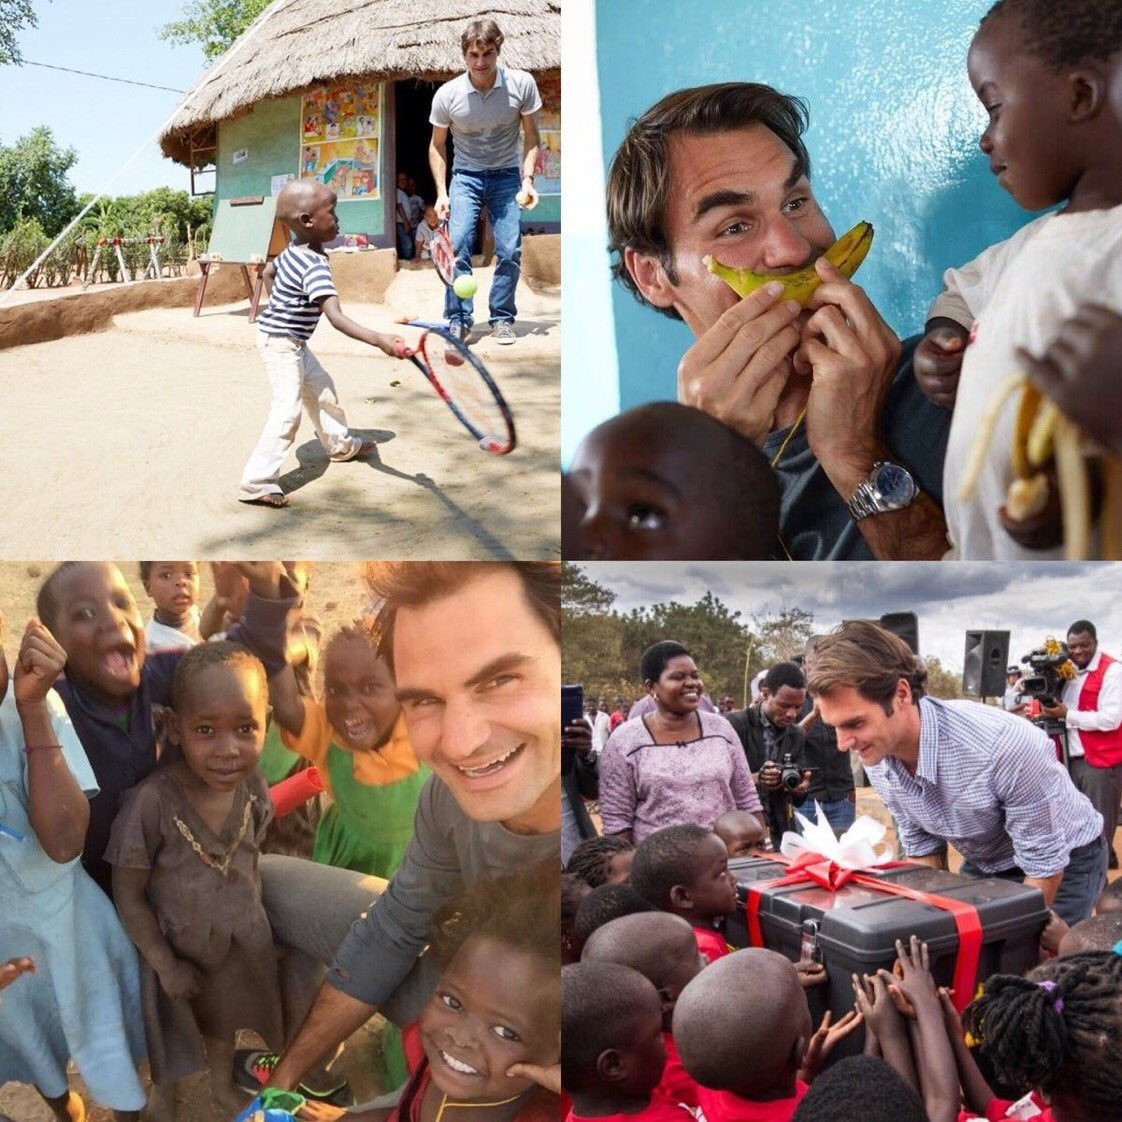 RT @GoogleFacts: Roger Federer has spent $13.5m to build 81 pre-schools in Malawi https://t.co/8dw0C4r34S